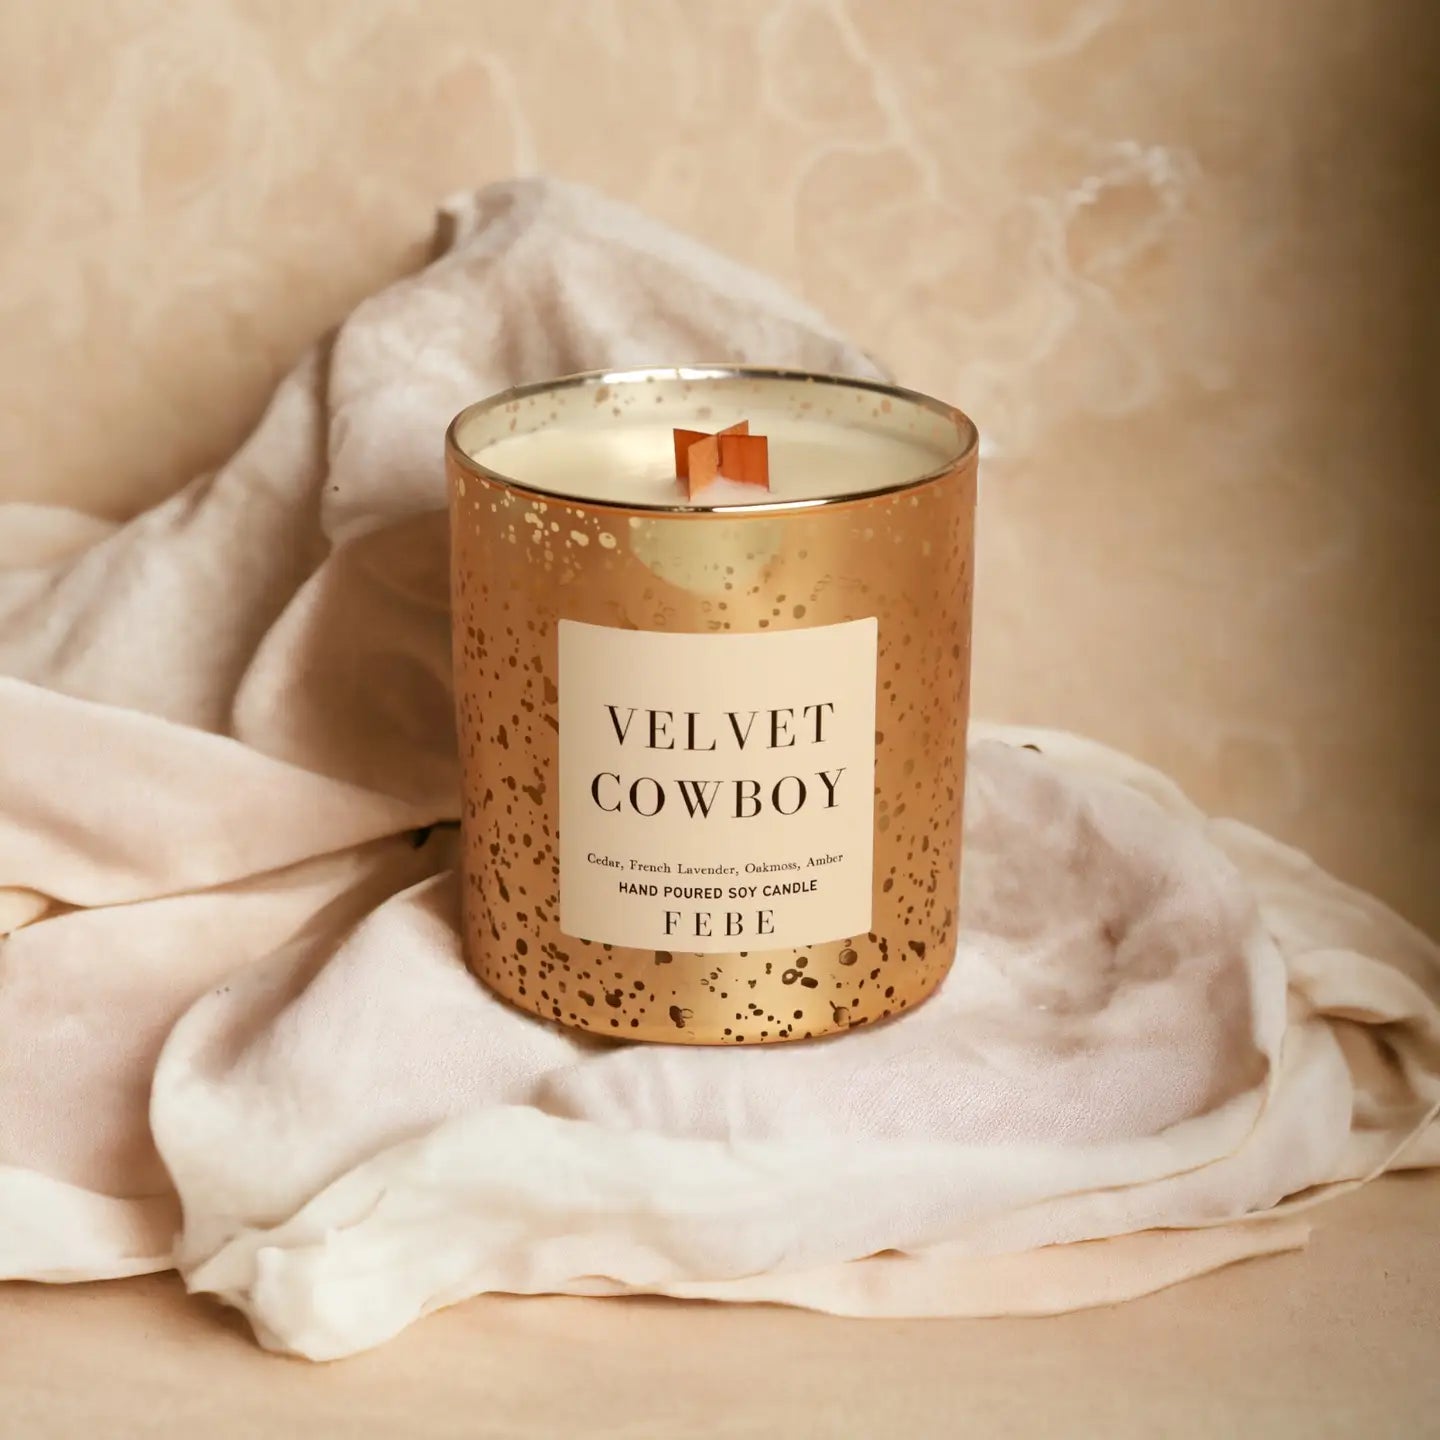 A scented candle labeled "Velvet Cowboy" by Faire, with a single wick, displayed on a soft, crumpled fabric against a marbled beige background. The FEBE candle's container has a speckled gold Arizona-style design.